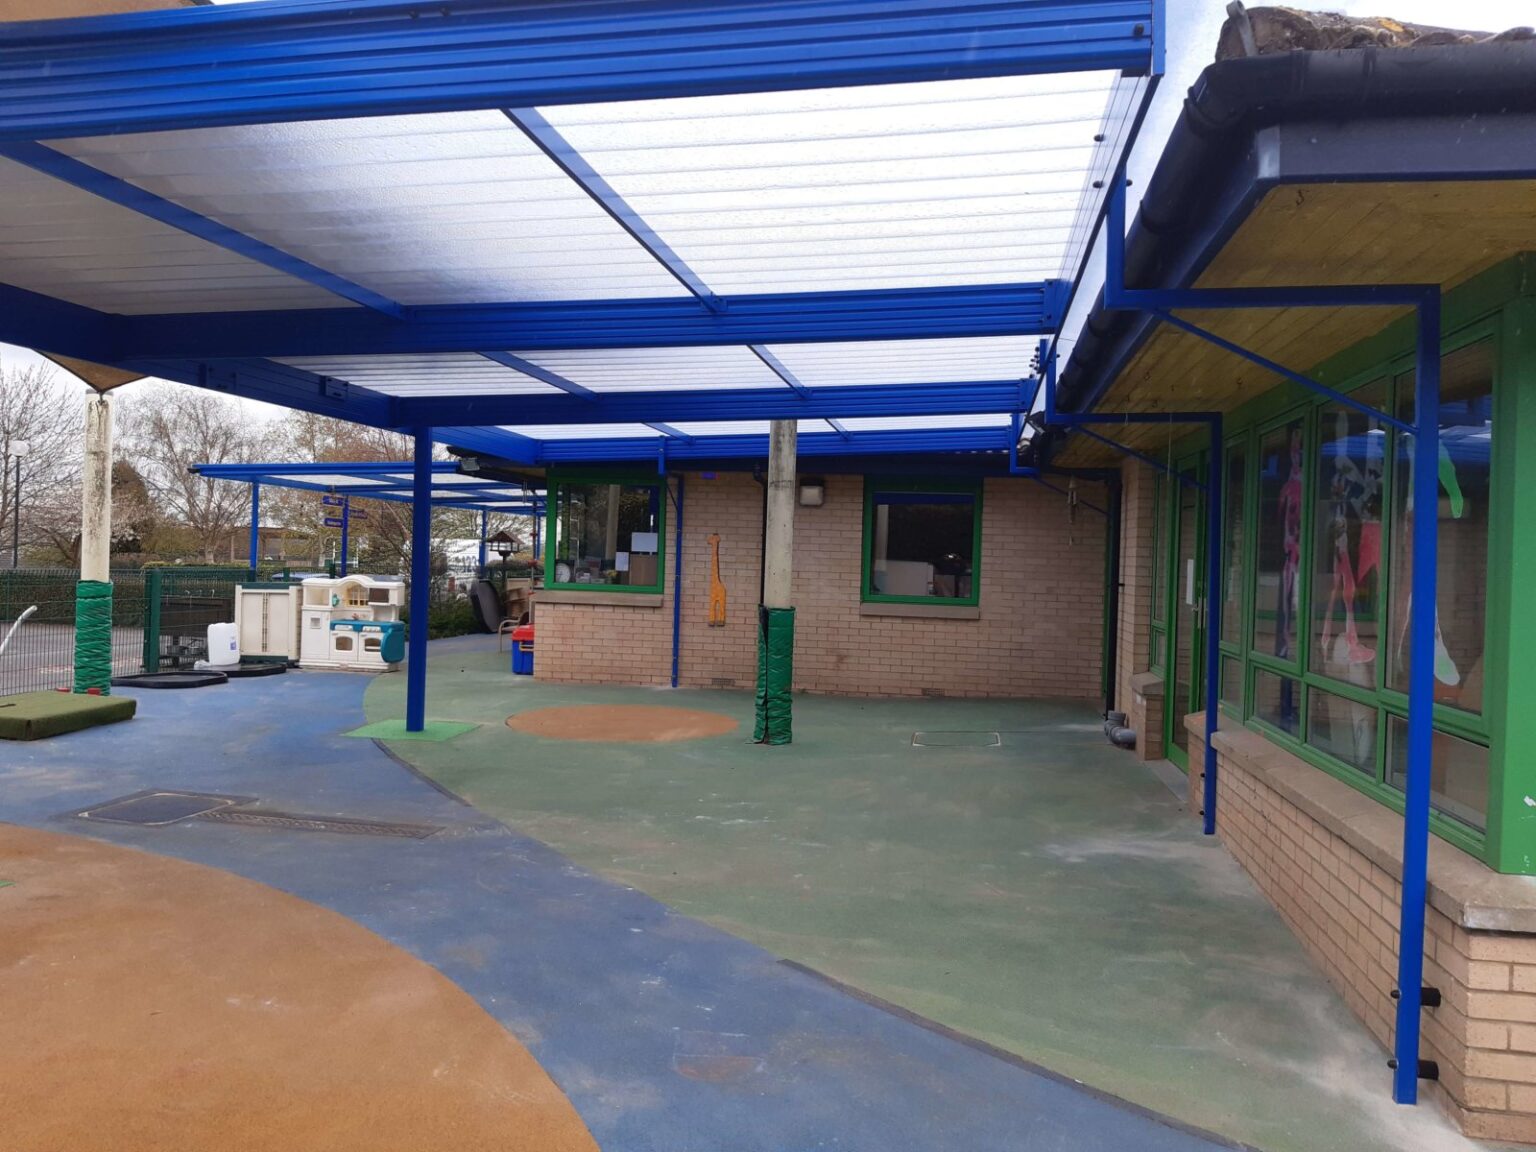 Large Playground Canopies in Bright Blue for Multiple Classrooms in Leeds UK by 123v plc